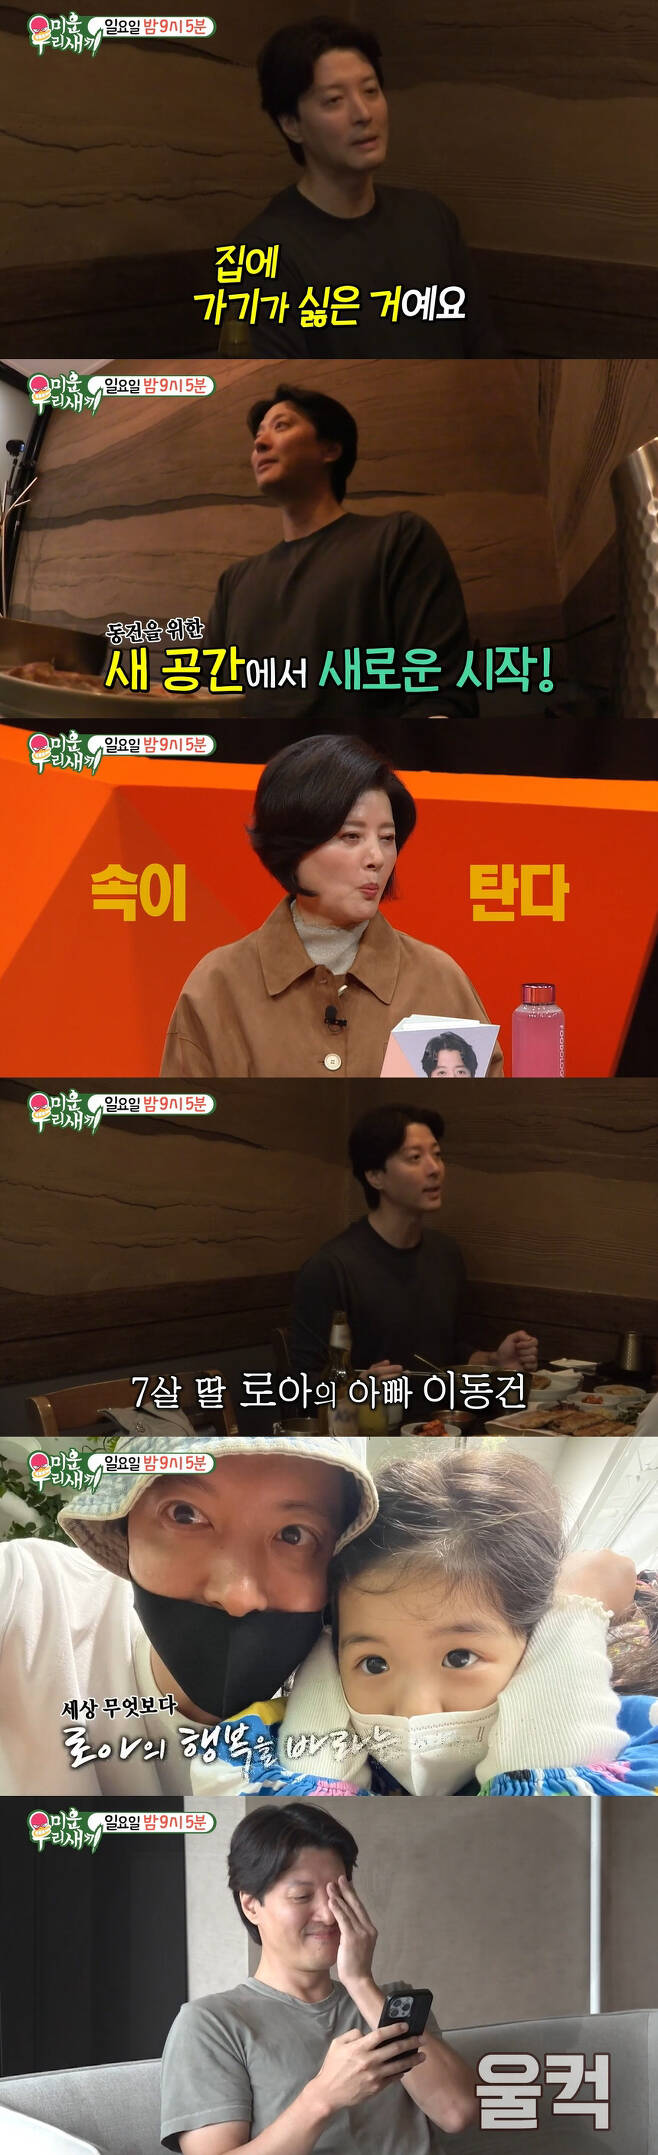 Lee Dong-gun has revealed his love for his 7-year-old daughter Roa.Lee Dong-gun appeared on SBS My Little Old Boy next weeks trailer.Lee Dong-gun said, Its been more than three years since Ive been divorced. He said, I did not want to go home because I was out of the house where three people lived and I was living alone.So I moved because I wanted to move to a place where I only needed space. In addition, Lee Dong-guns daily life was revealed. Lee Dong-gun showed up at home and enjoyed drinking even when he went out to eat.Lee Dong-guns mother, who appeared in the studio, observed her sons daily routine and worried, Whats up?In addition, Lee Dong-guns phone conversation with his only daughter, Roa, was revealed, and he showed a smile on his daughters voice and a daughter idiot.Lee Dong-gun said, From the moment of divorce, I met Roa unconditionally every Sunday. I want to see my daughter grow up happily because I am only my father.On the other hand, Lee Dong-gun made a relationship with actor Cho Yoon-hee through the KBS 2TV weekend drama Laurel suits gentlemen in 2017, and married that year and had a daughter in the suburbs, but divorced in 2020.